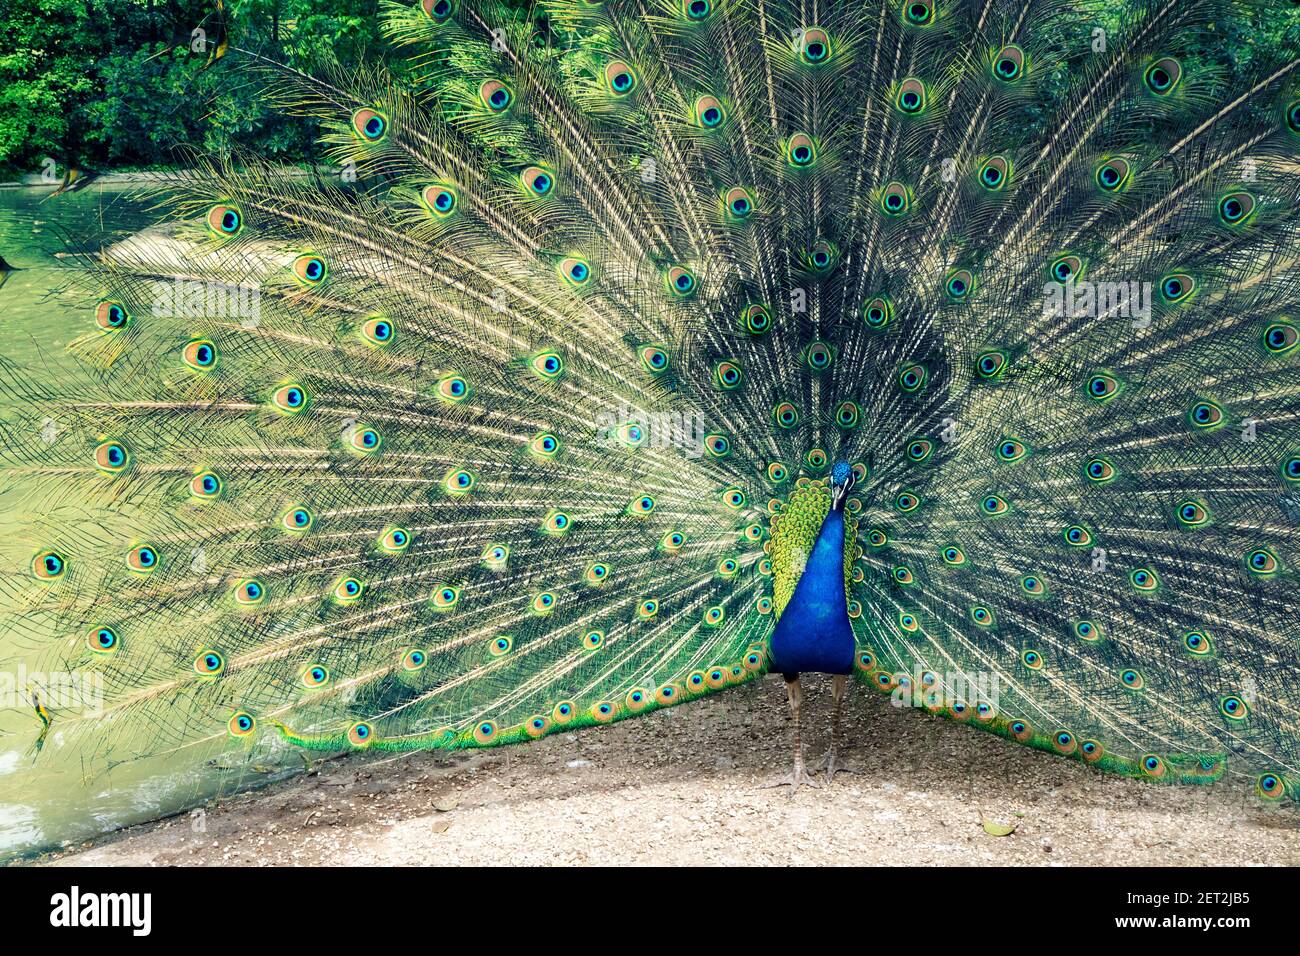 Portrait of a peacock, Italy Stock Photo